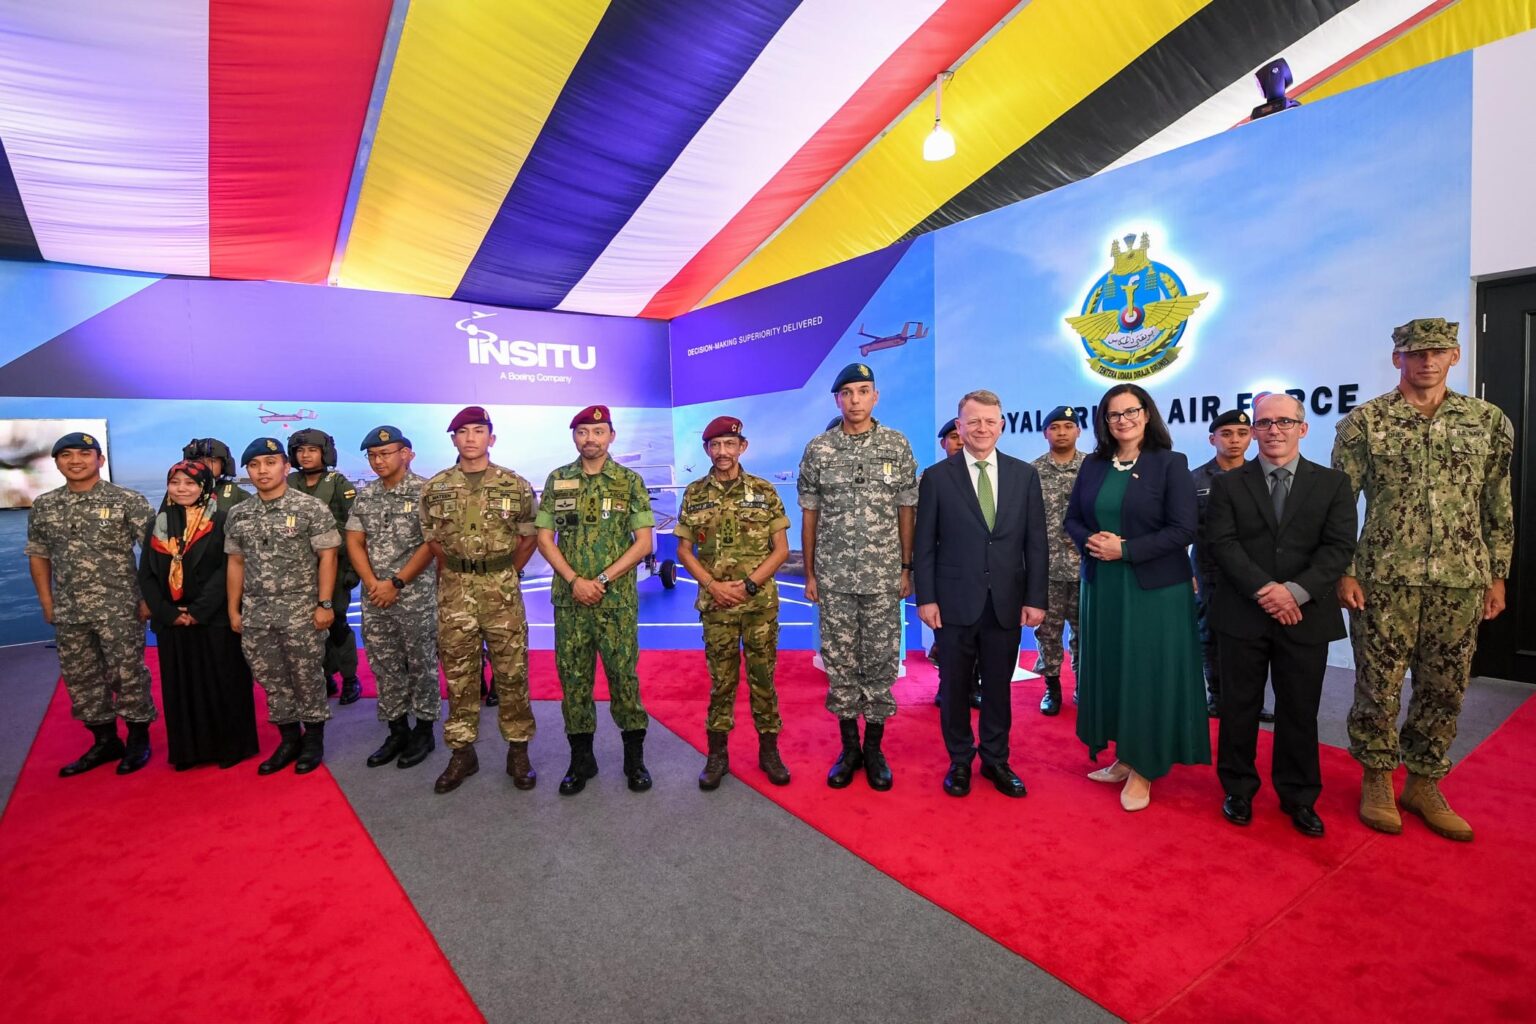 ChargÃ© d'Affaires Emily Fleckner was pleased to meet His Majesty the Sultan at the unveiling of the Insitu (a Boeing subsidiary) unmanned aerial system.